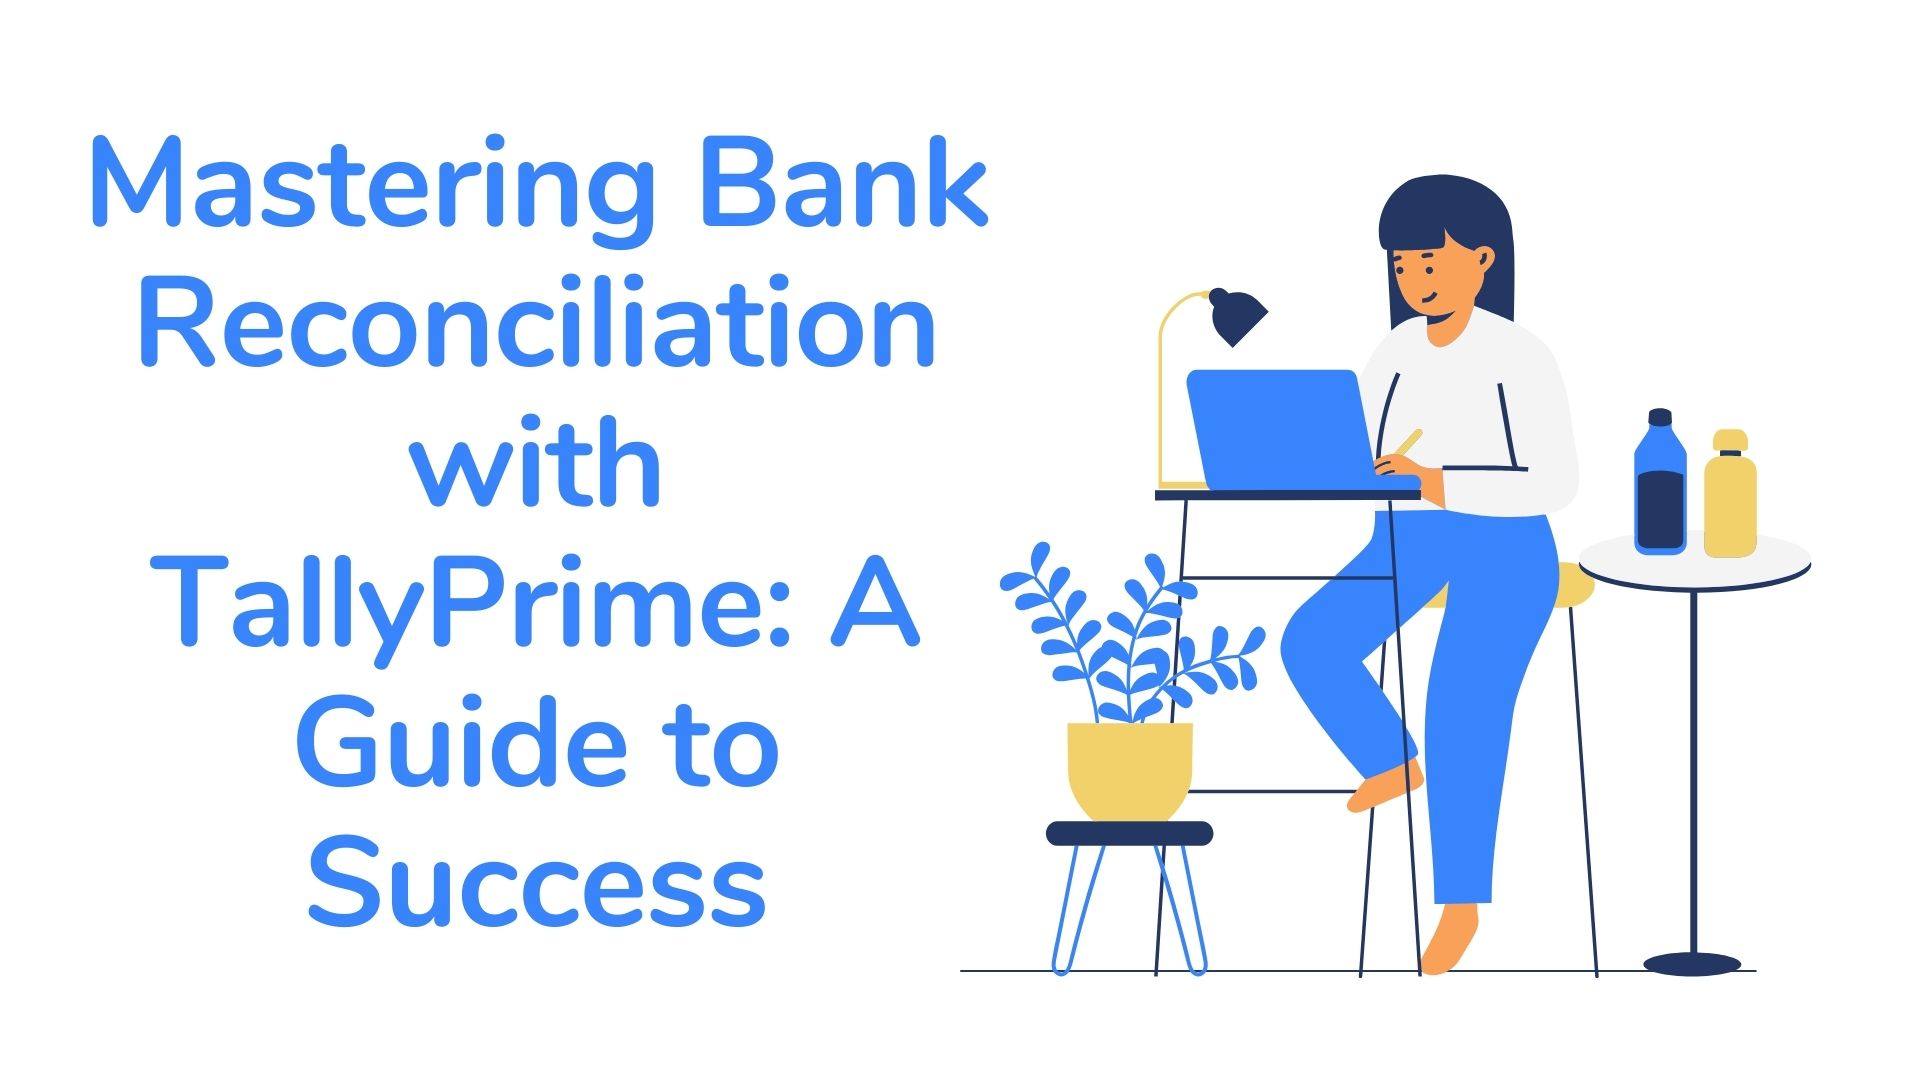 Mastering Bank Reconciliation with TallyPrime A Guide to Success